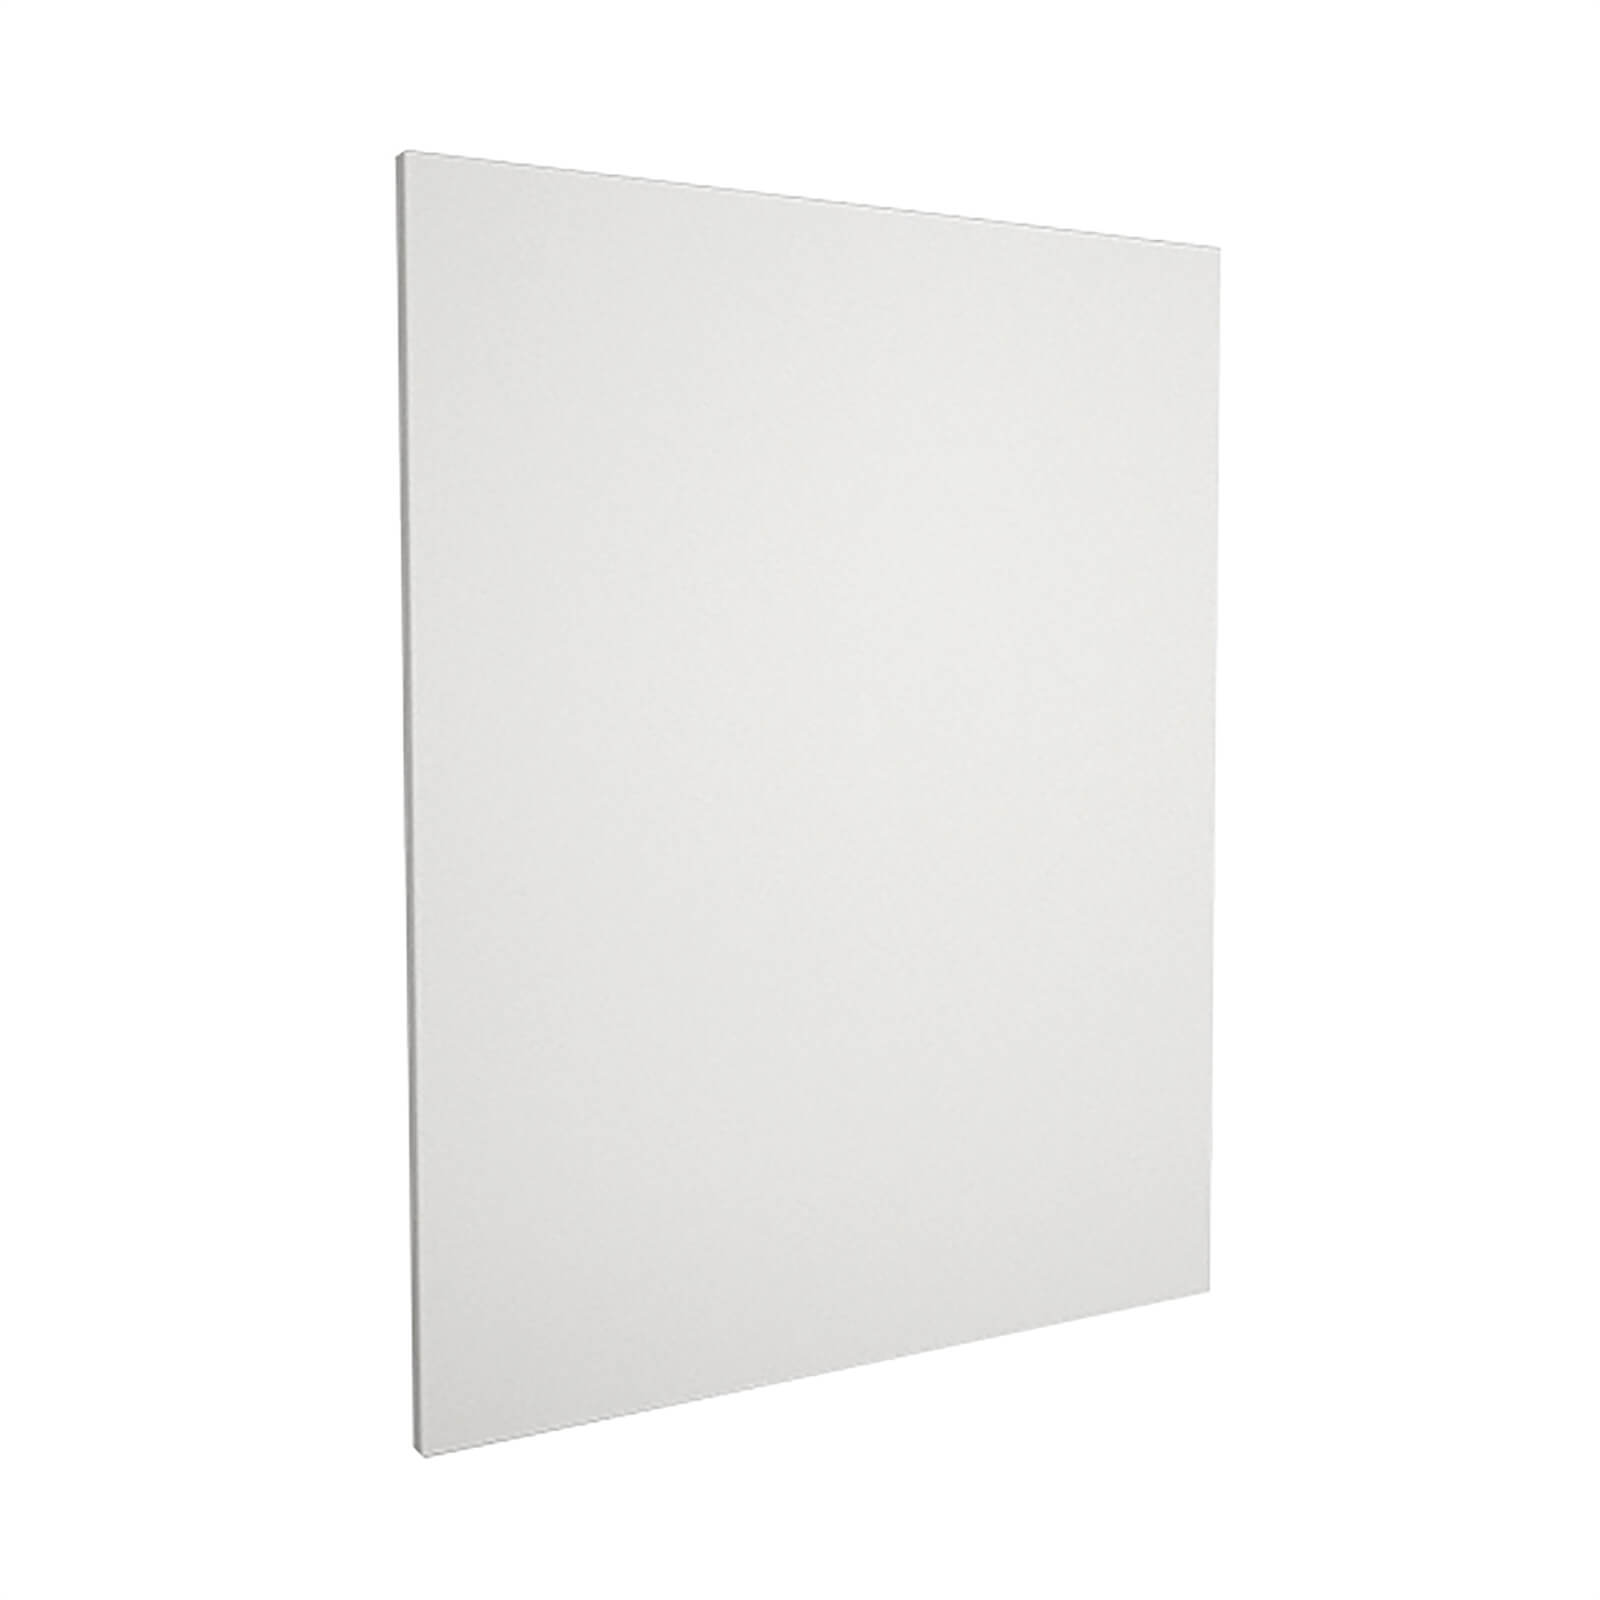 Base Replacement End Panels - Pair for High Gloss Slab White, Handleless White Gloss or Gloss Slab White